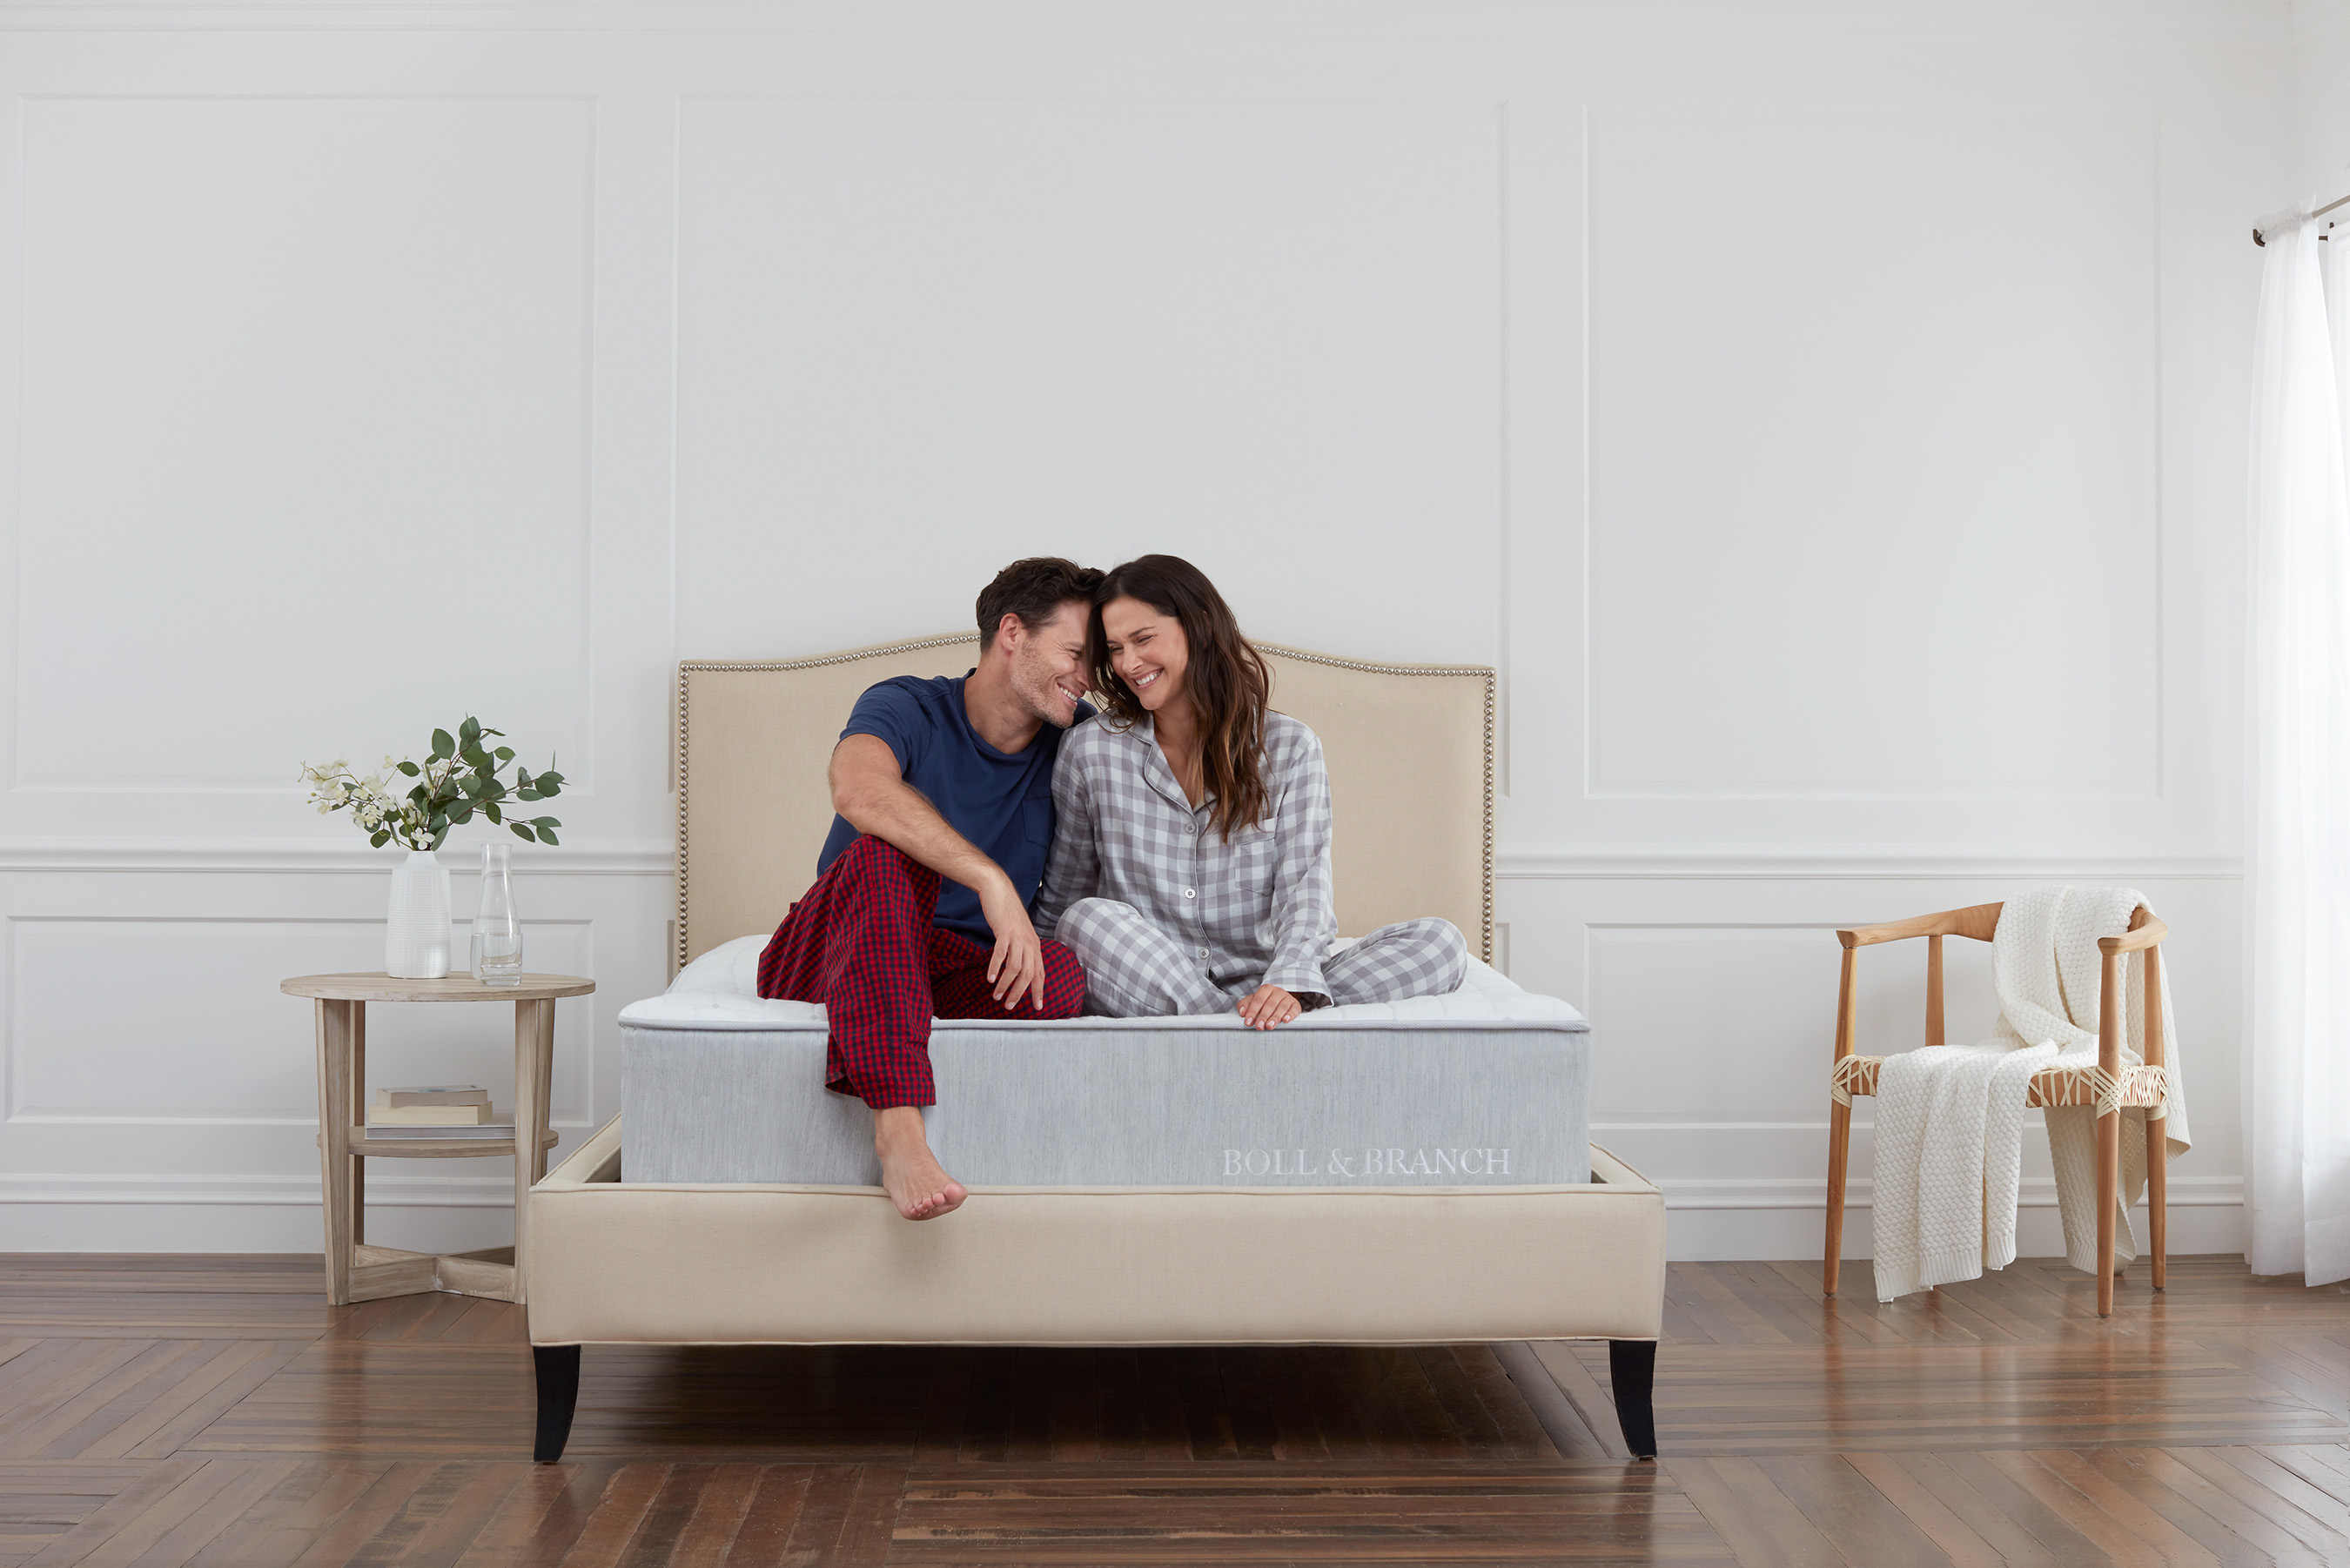 Boll & Branch announces the launch of its first-ever mattress, made with the same discerning standards and superior craftsmanship Boll & Branch has built its reputation on, and delivered with first class service right to your bedroom.